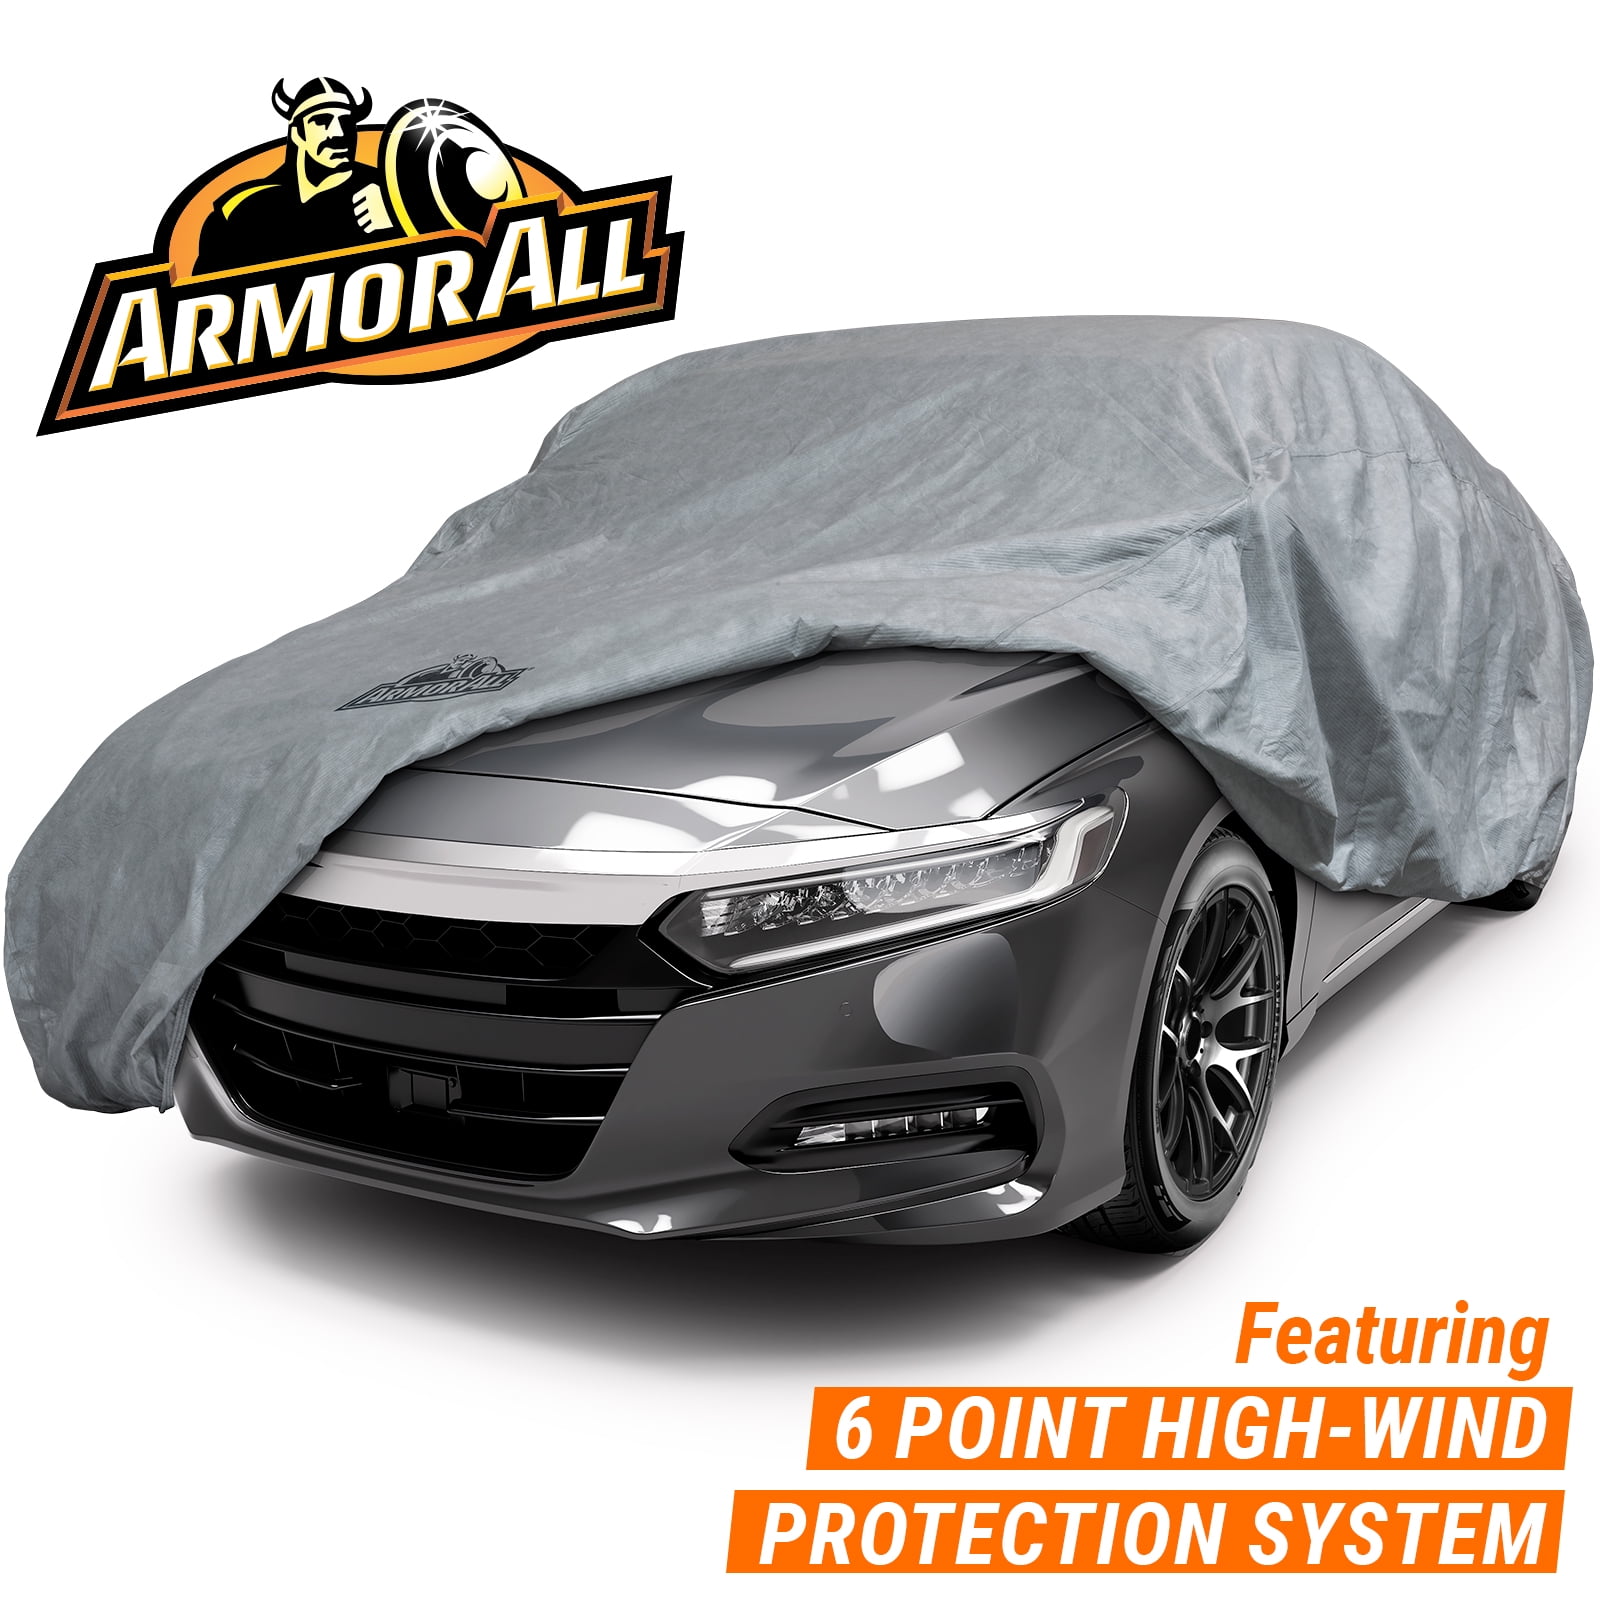 Armor All SUV All Cover, Grey Length to up Heavy Fits Duty 186\